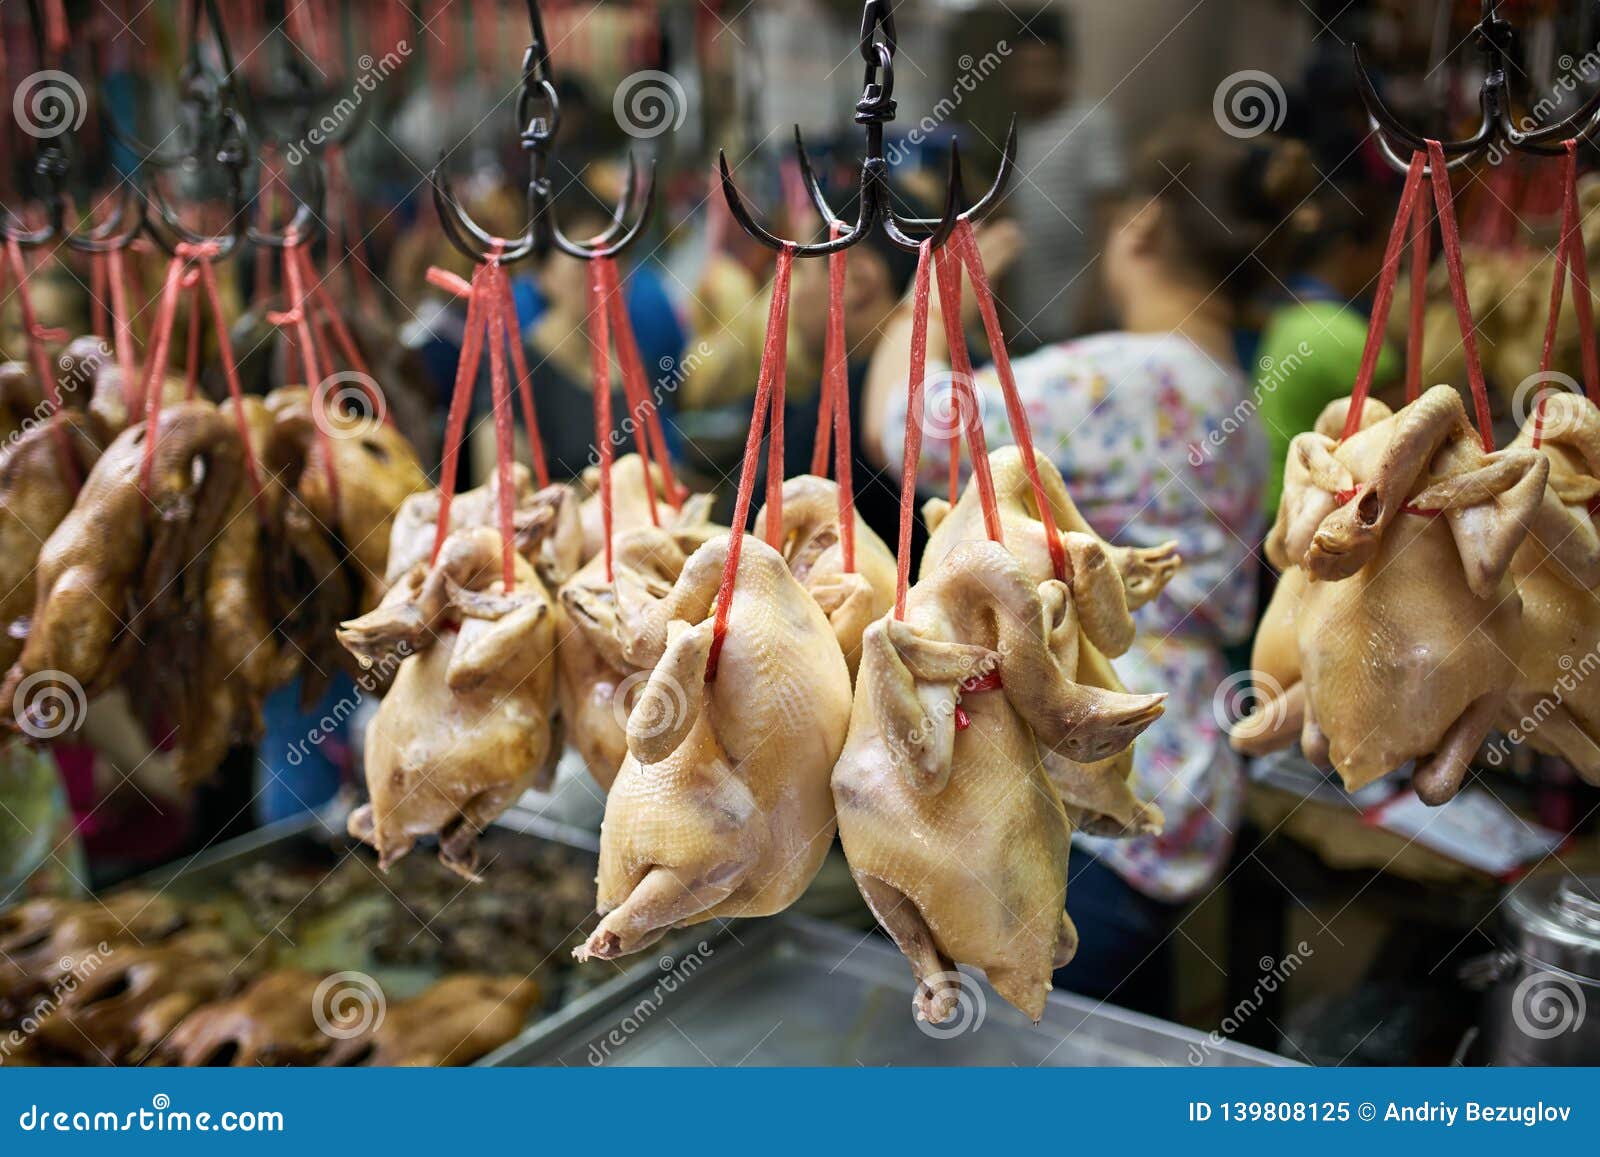 Street Market Showcase with Poultry in Thailand Stock Image - Image of  sale, culture: 139808125